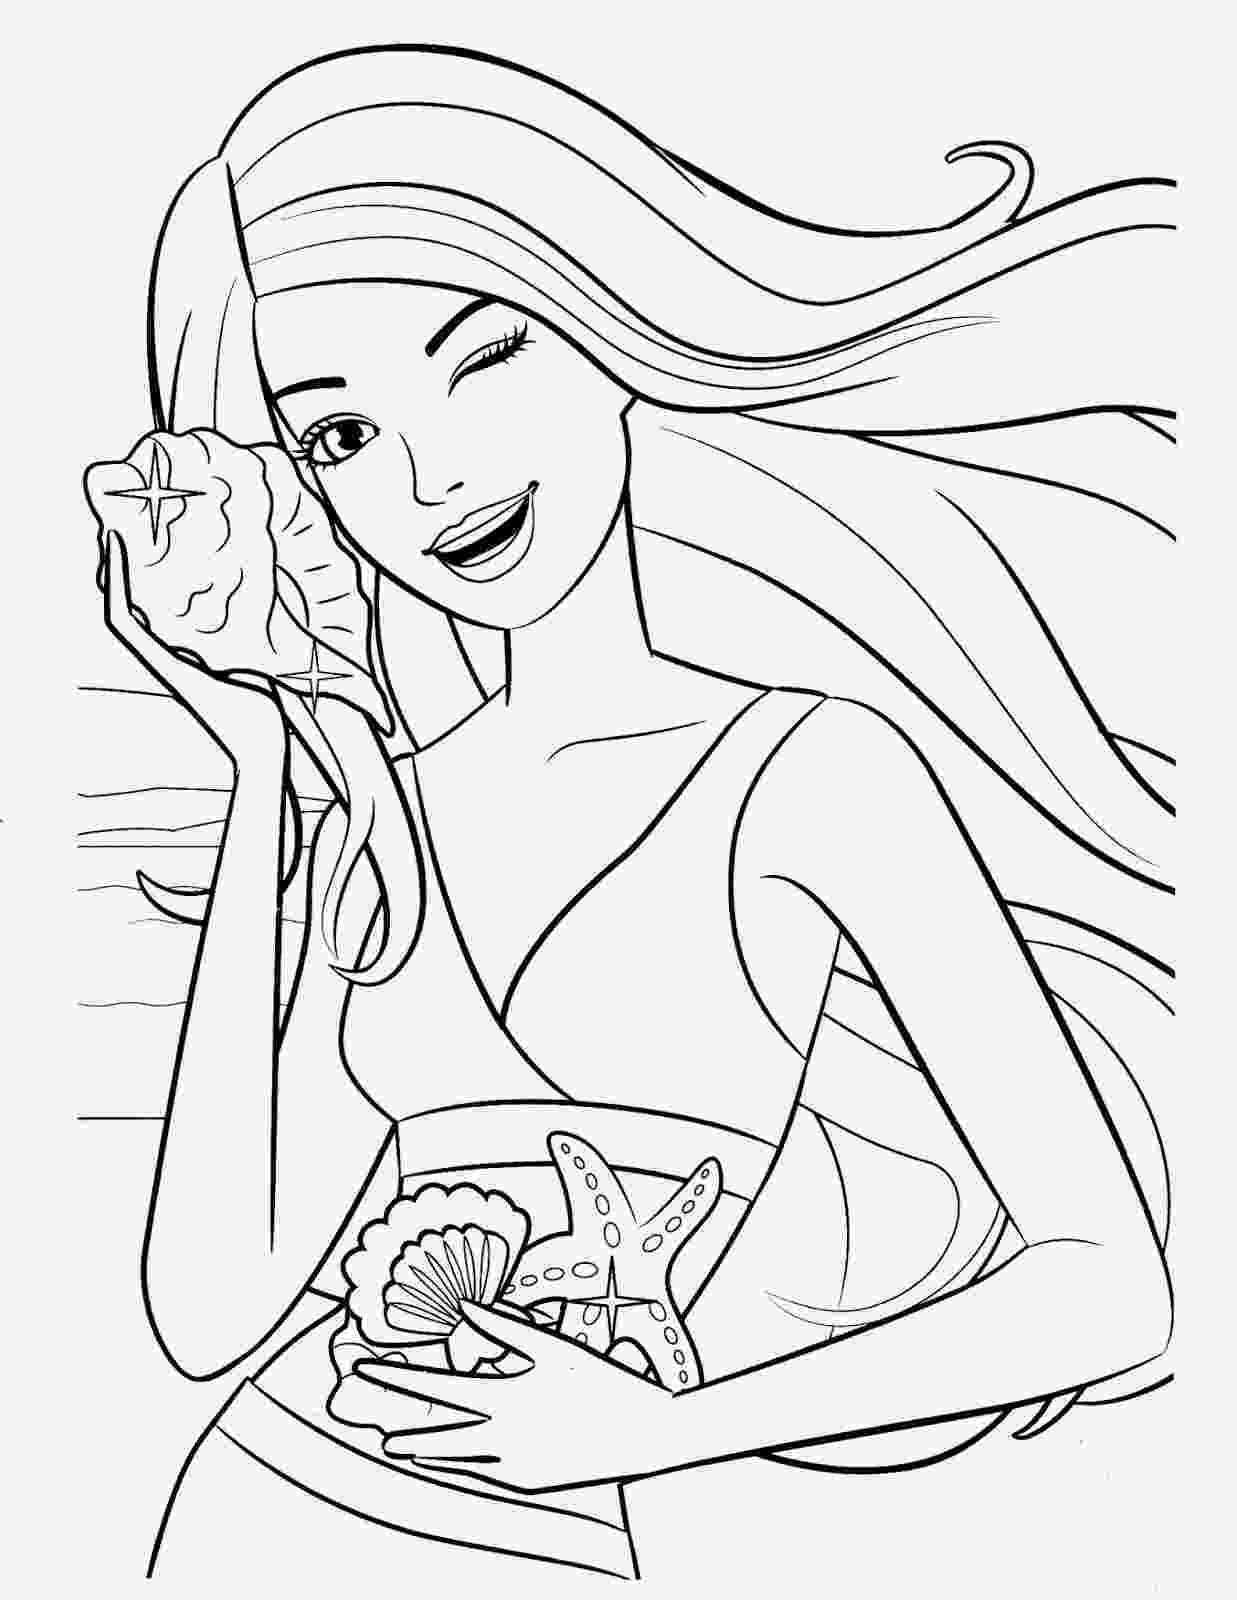 barbie doll pictures to color barbie to color for children barbie kids coloring pages to doll pictures barbie color 